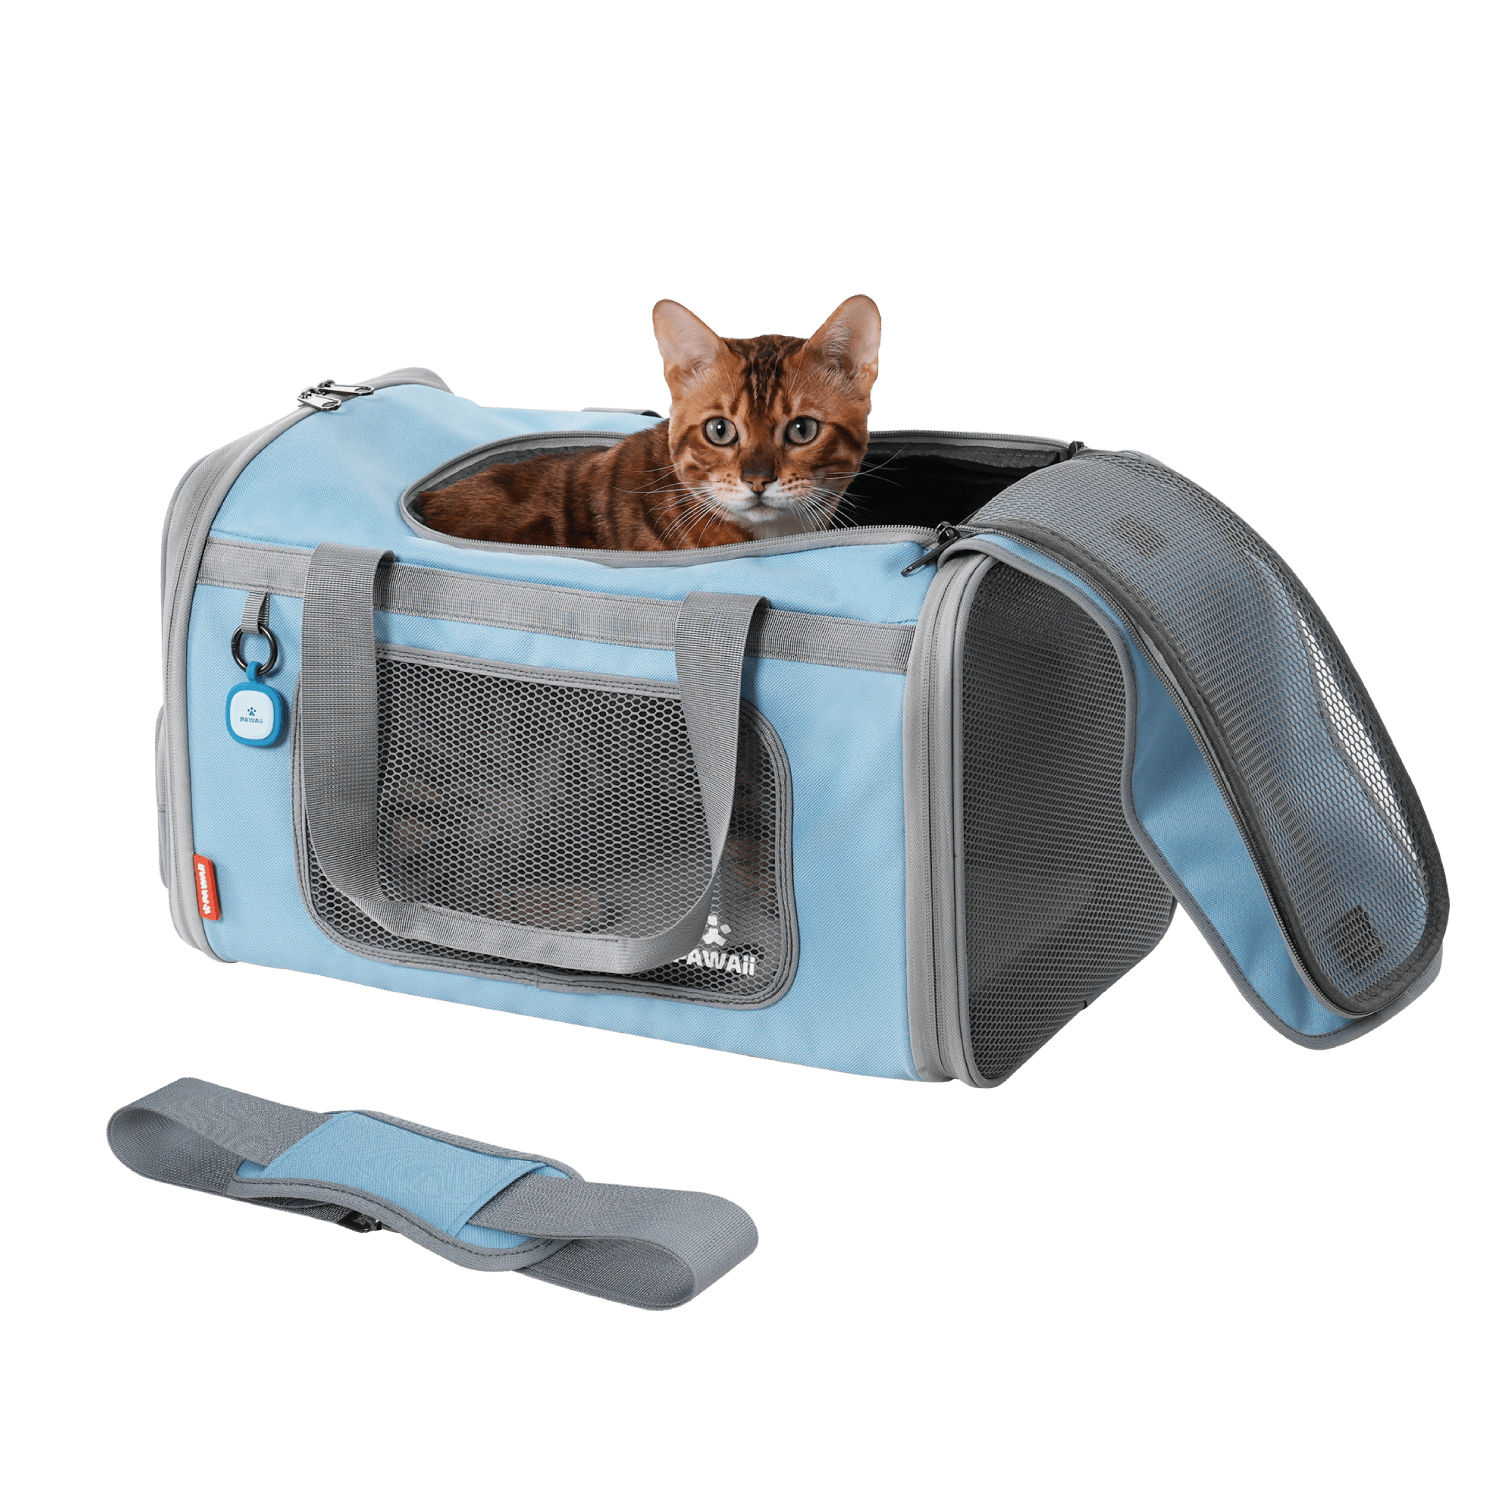 Pawaii Pet Carrier, Tsa Airline Approved Cat Carrier, Soft Sided Collapsible  Pet Travel Carrier, Foldable, Protable